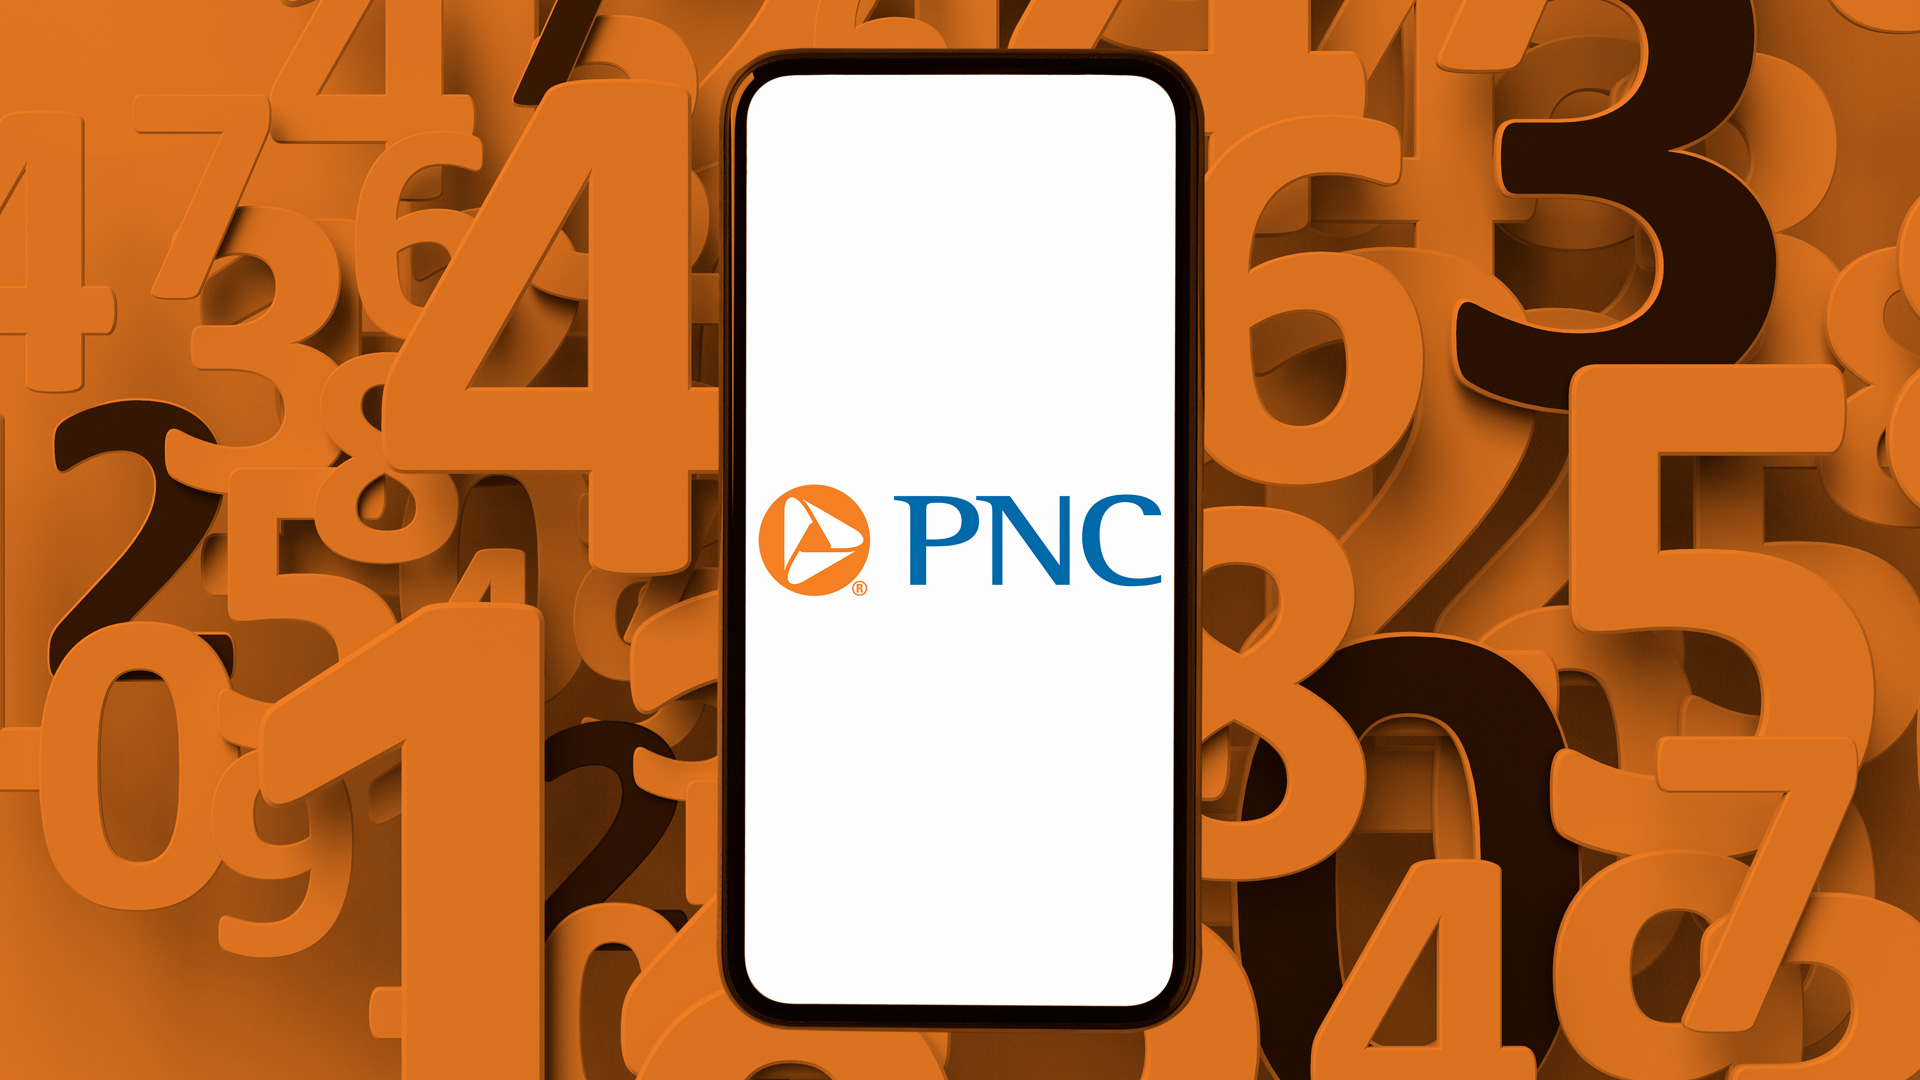 Can You Get A Voided Check Online Pnc Pnc Routing Number Locate Your Number Gobankingrates